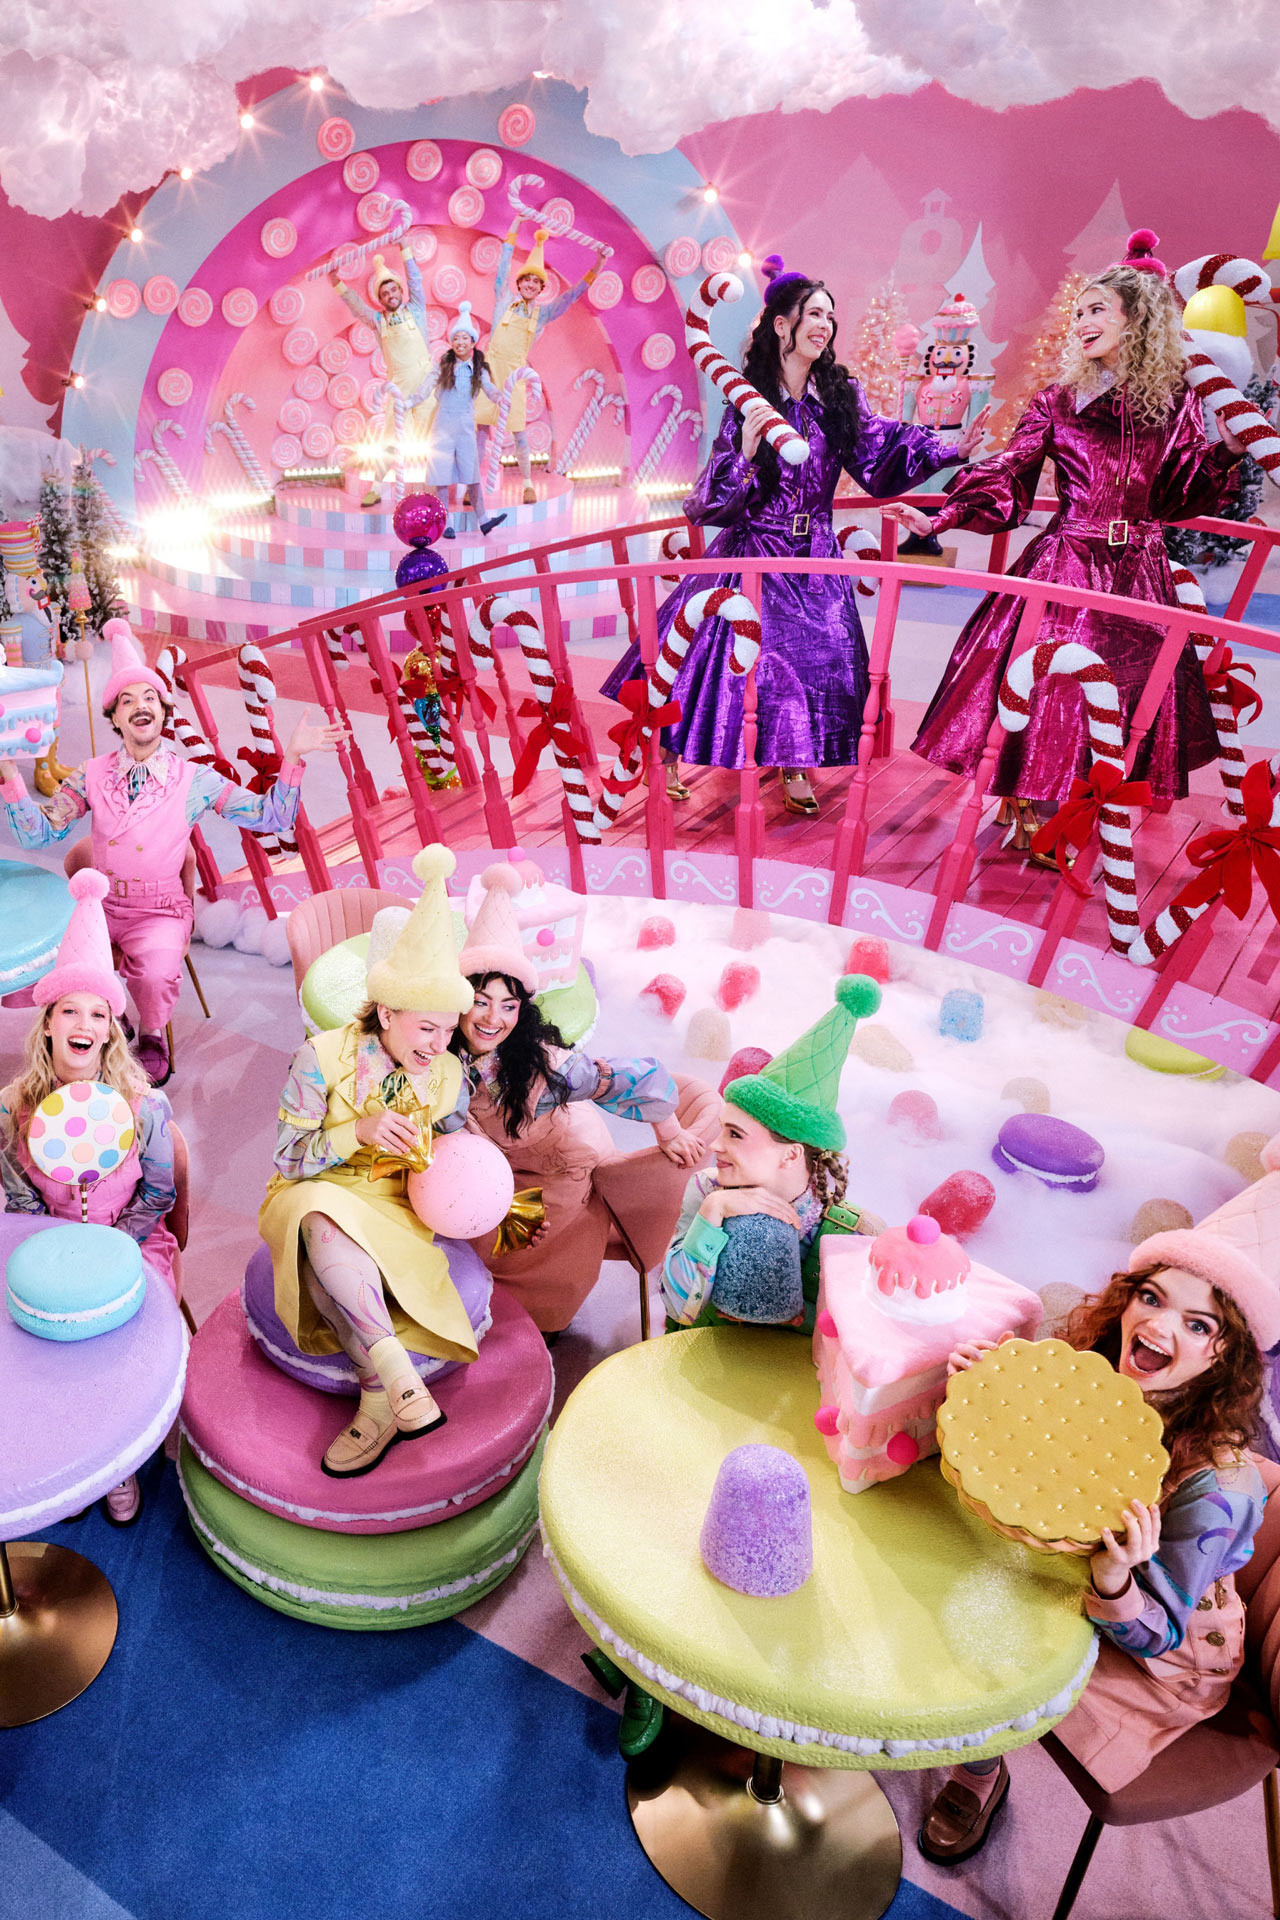 Click here to open the gallery overlay for the image: playful image of people in costume in a candy land like setting